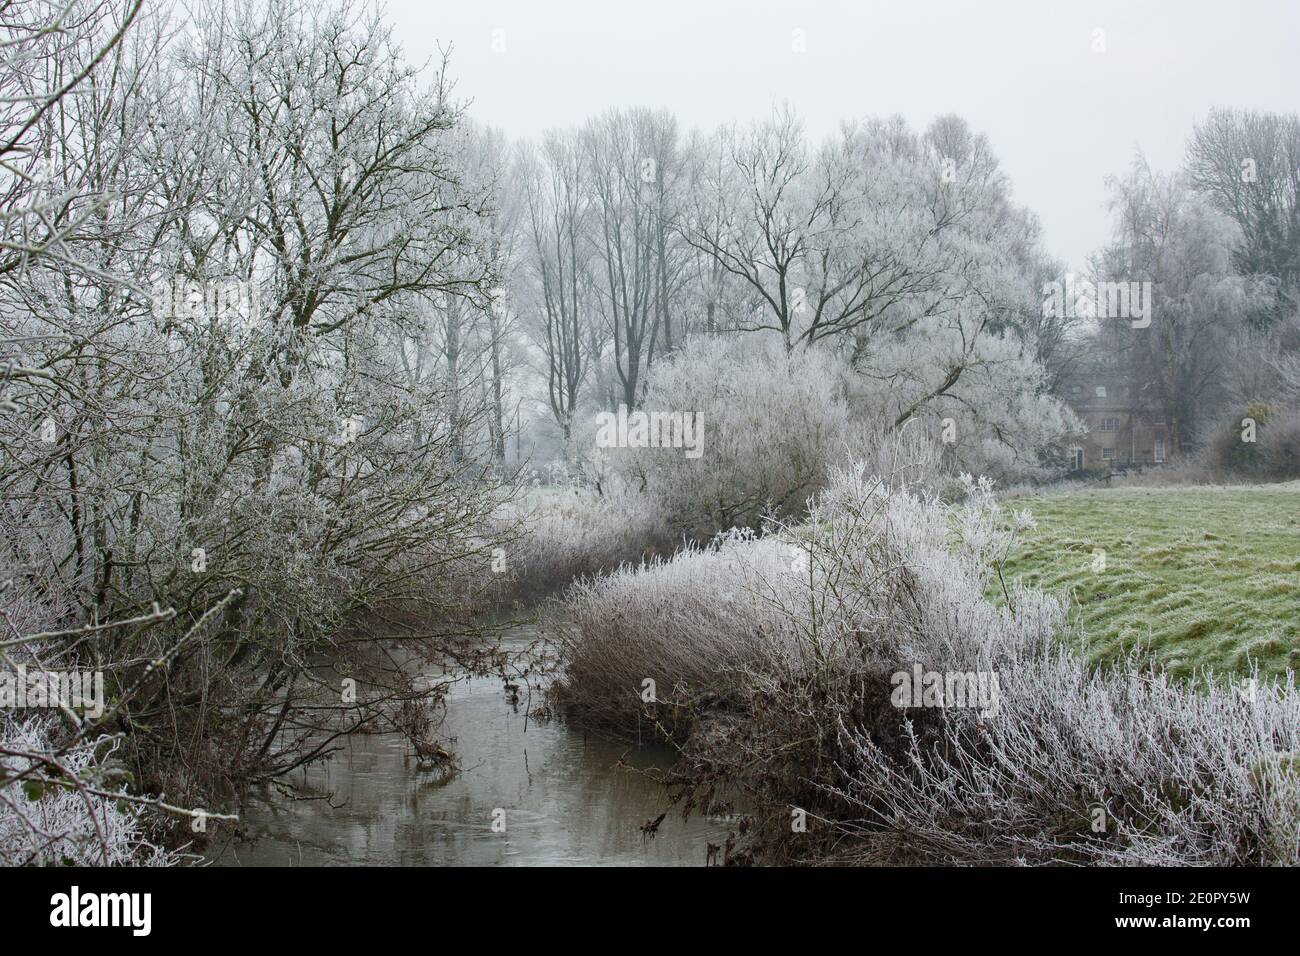 Vegetation covered in frost on the banks of the Dorset Stour following a night of freezing temperatures on New Year’s Day 2021. Gillingham Dorset Engl Stock Photo